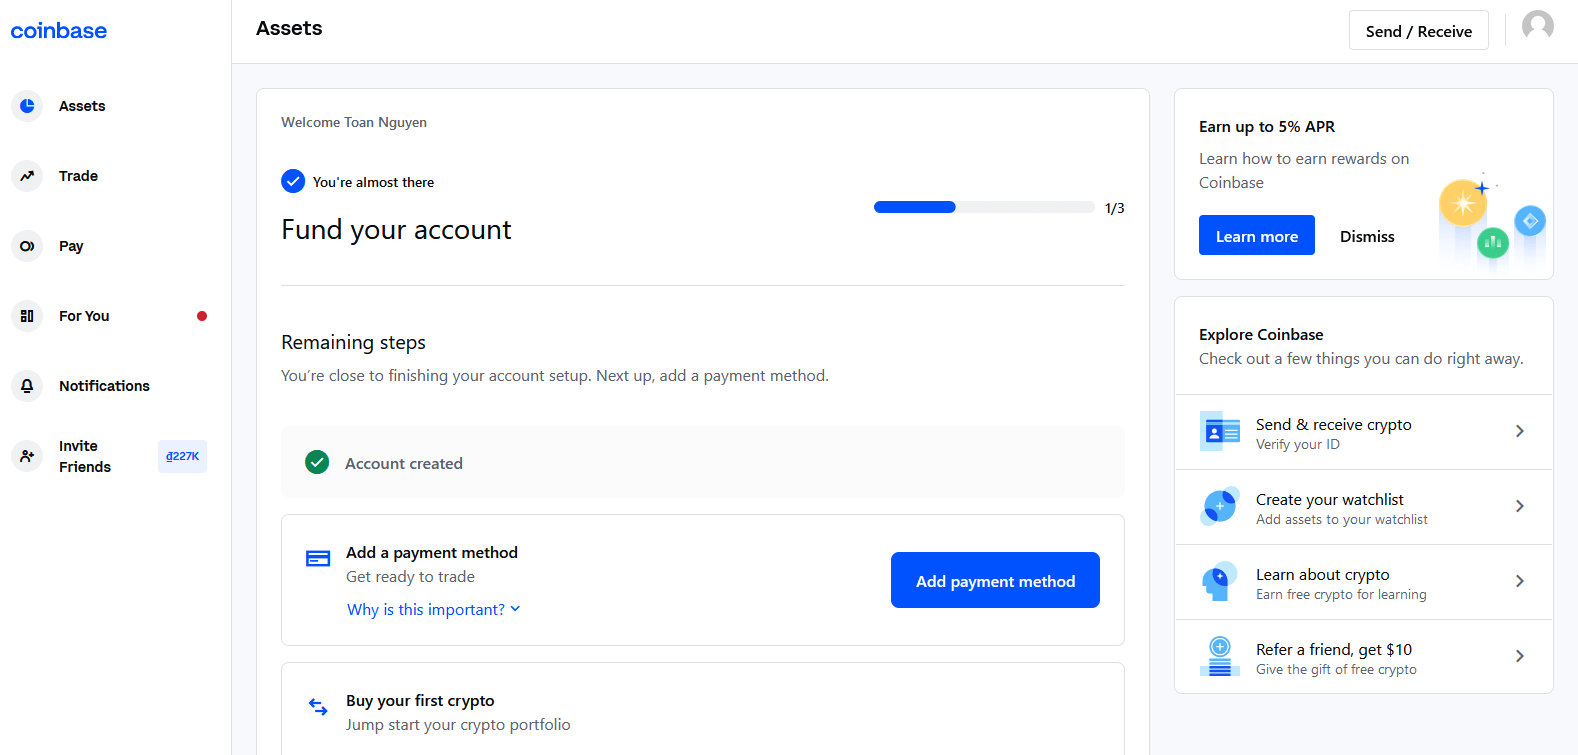 How to Register and Login Account in Coinbase